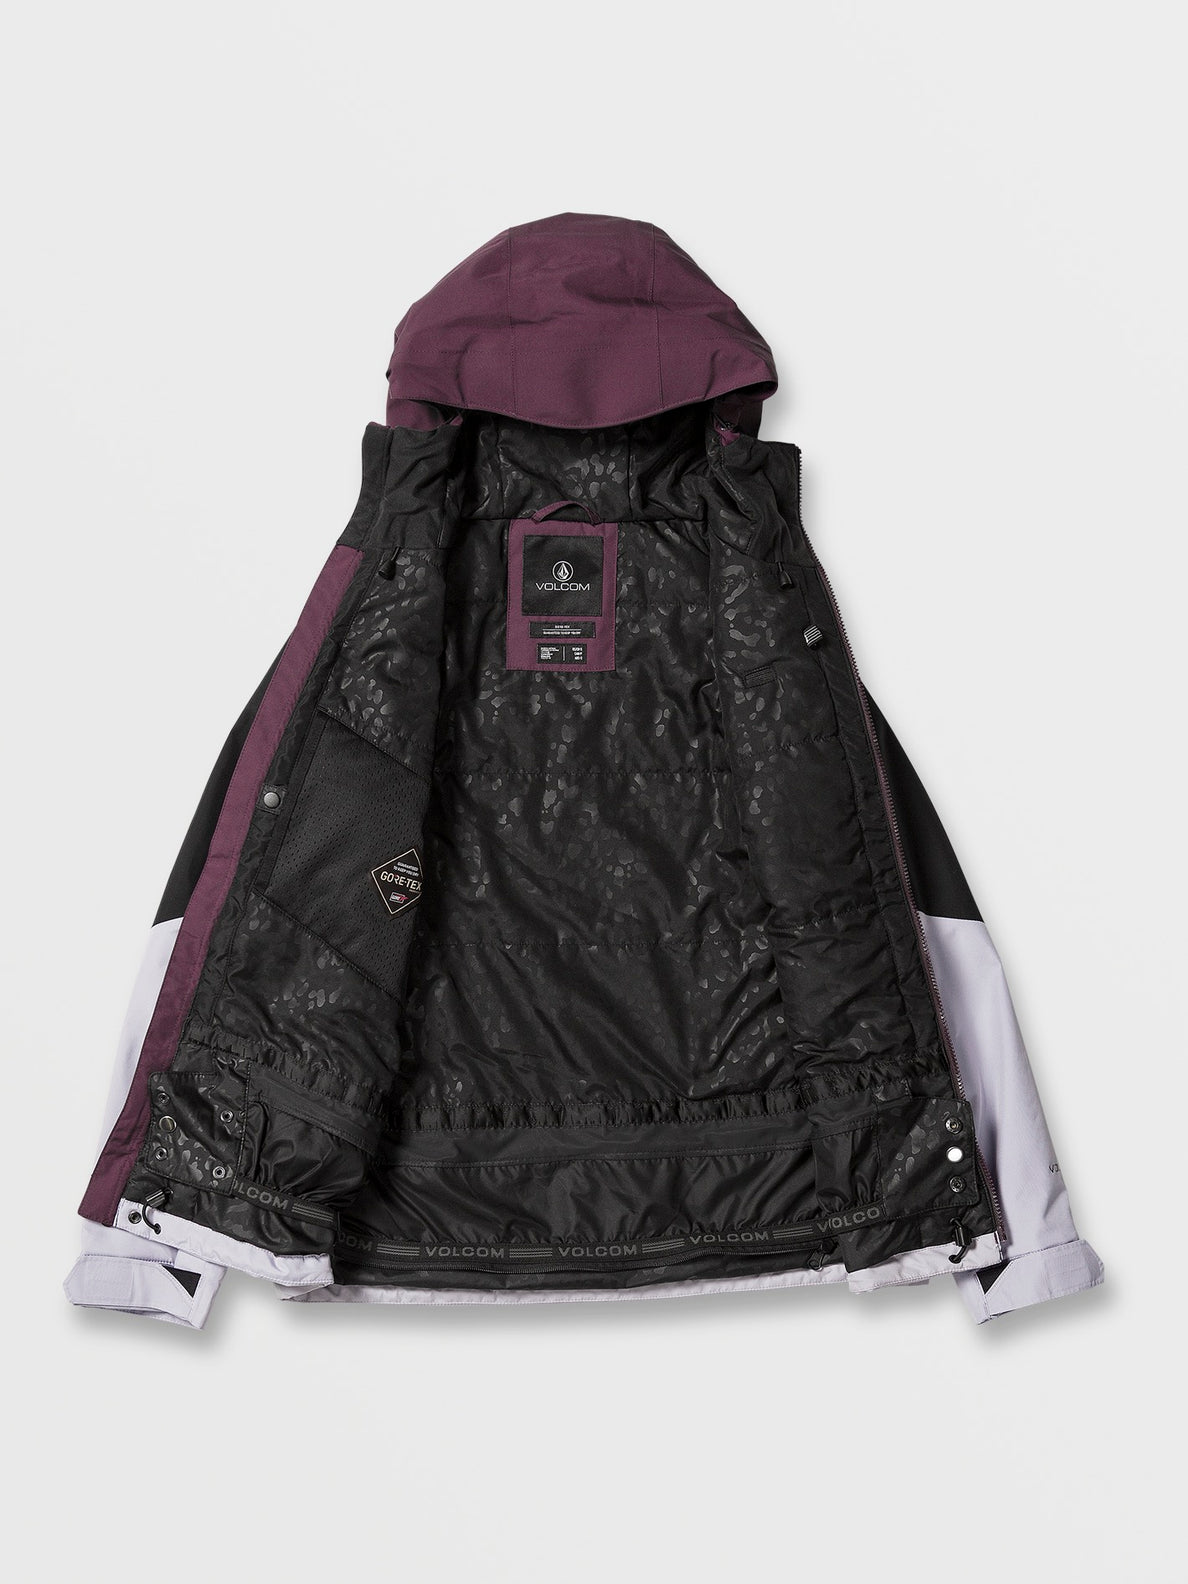 Womens V.Co Aris Insulated Gore Jacket - Blackberry (H0452405_BRY) [21]